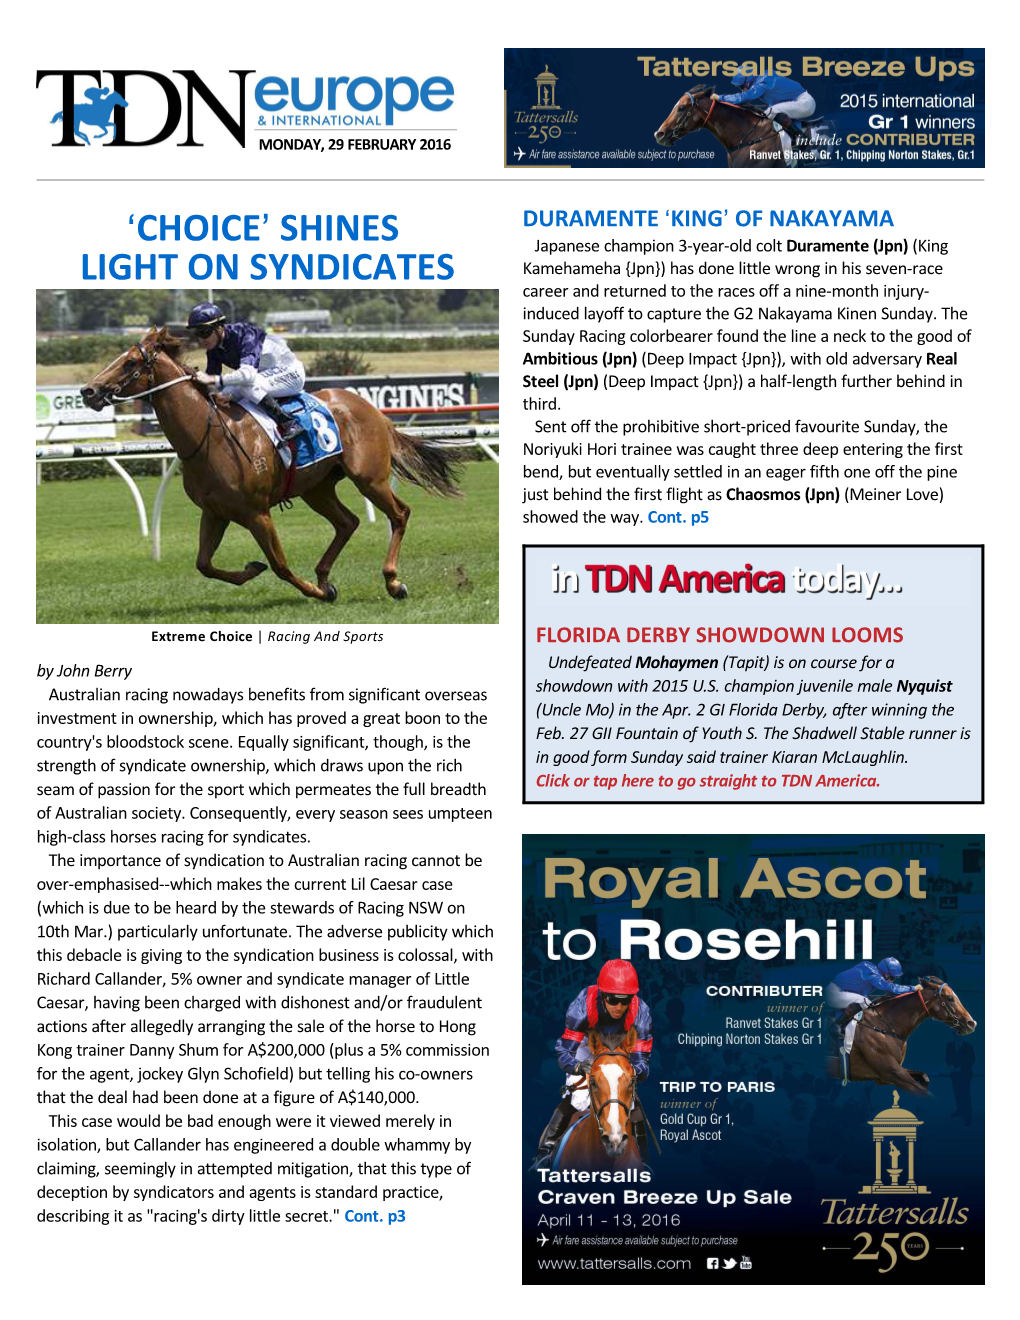 Choice= Shines Light on Syndicates Cont